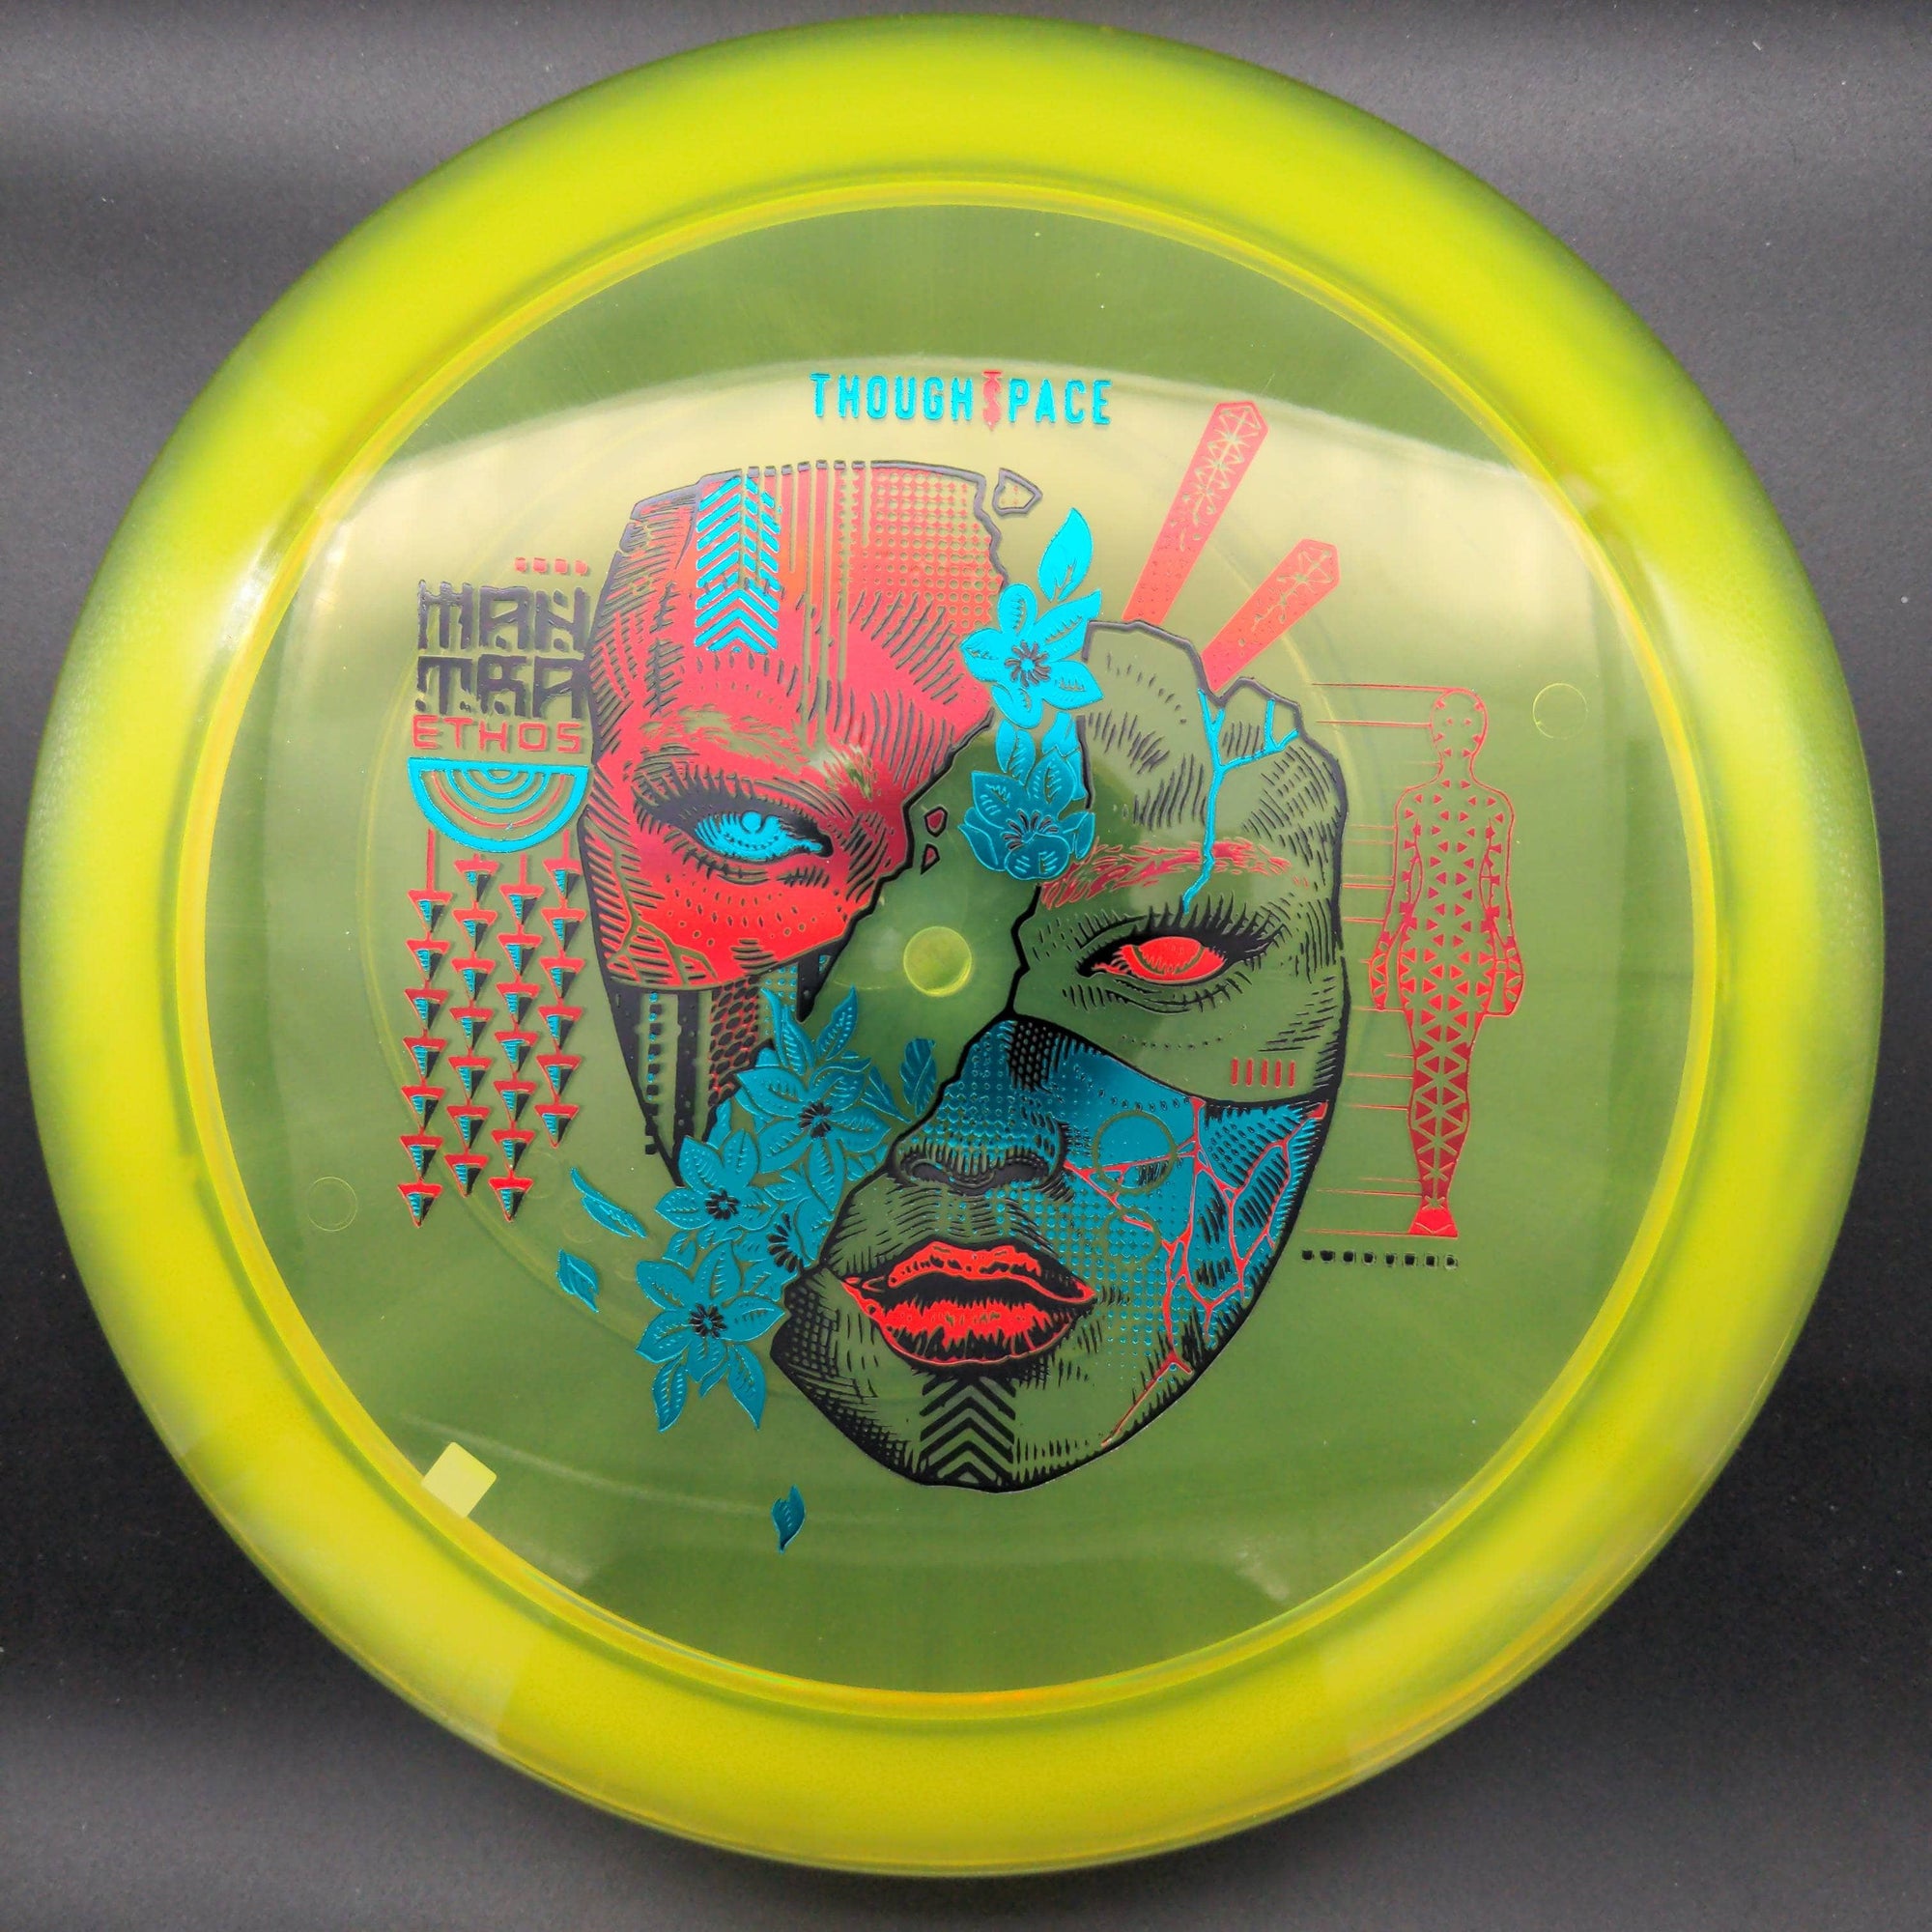 Thought Space Athletics Fairway Driver Yellow Green/Red Stamp 173g Mantra, Ethos Plastic